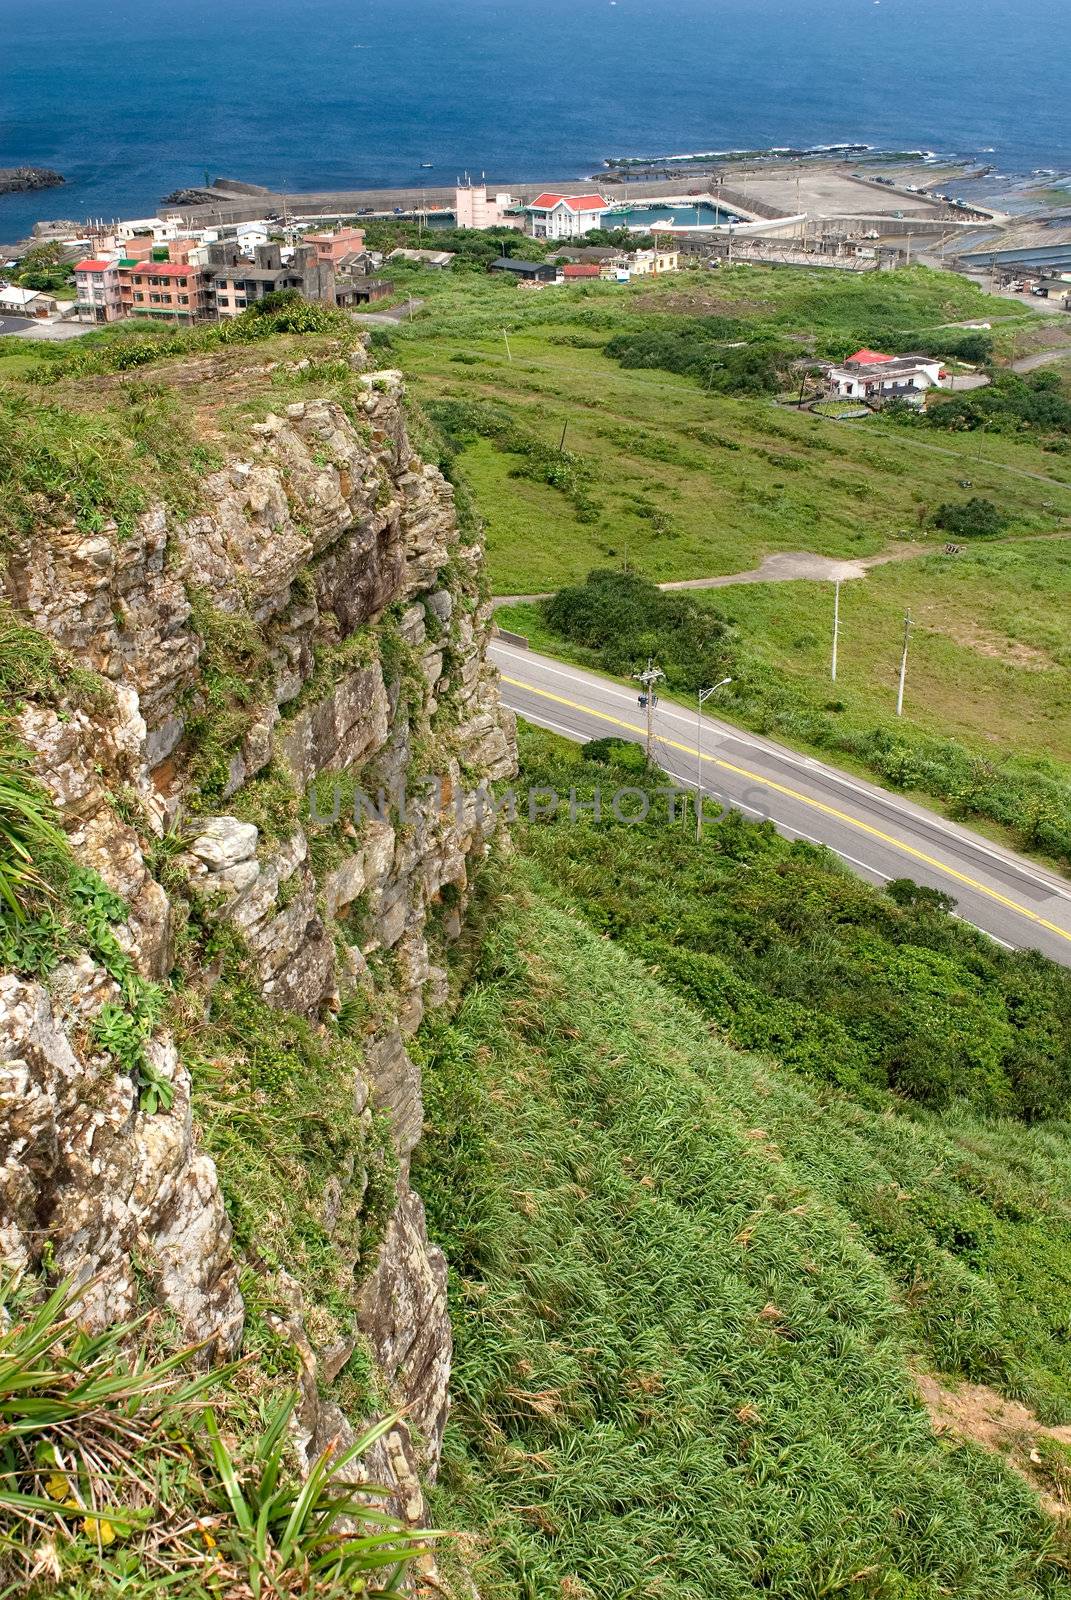 It is a green cliff and small town near the sea.